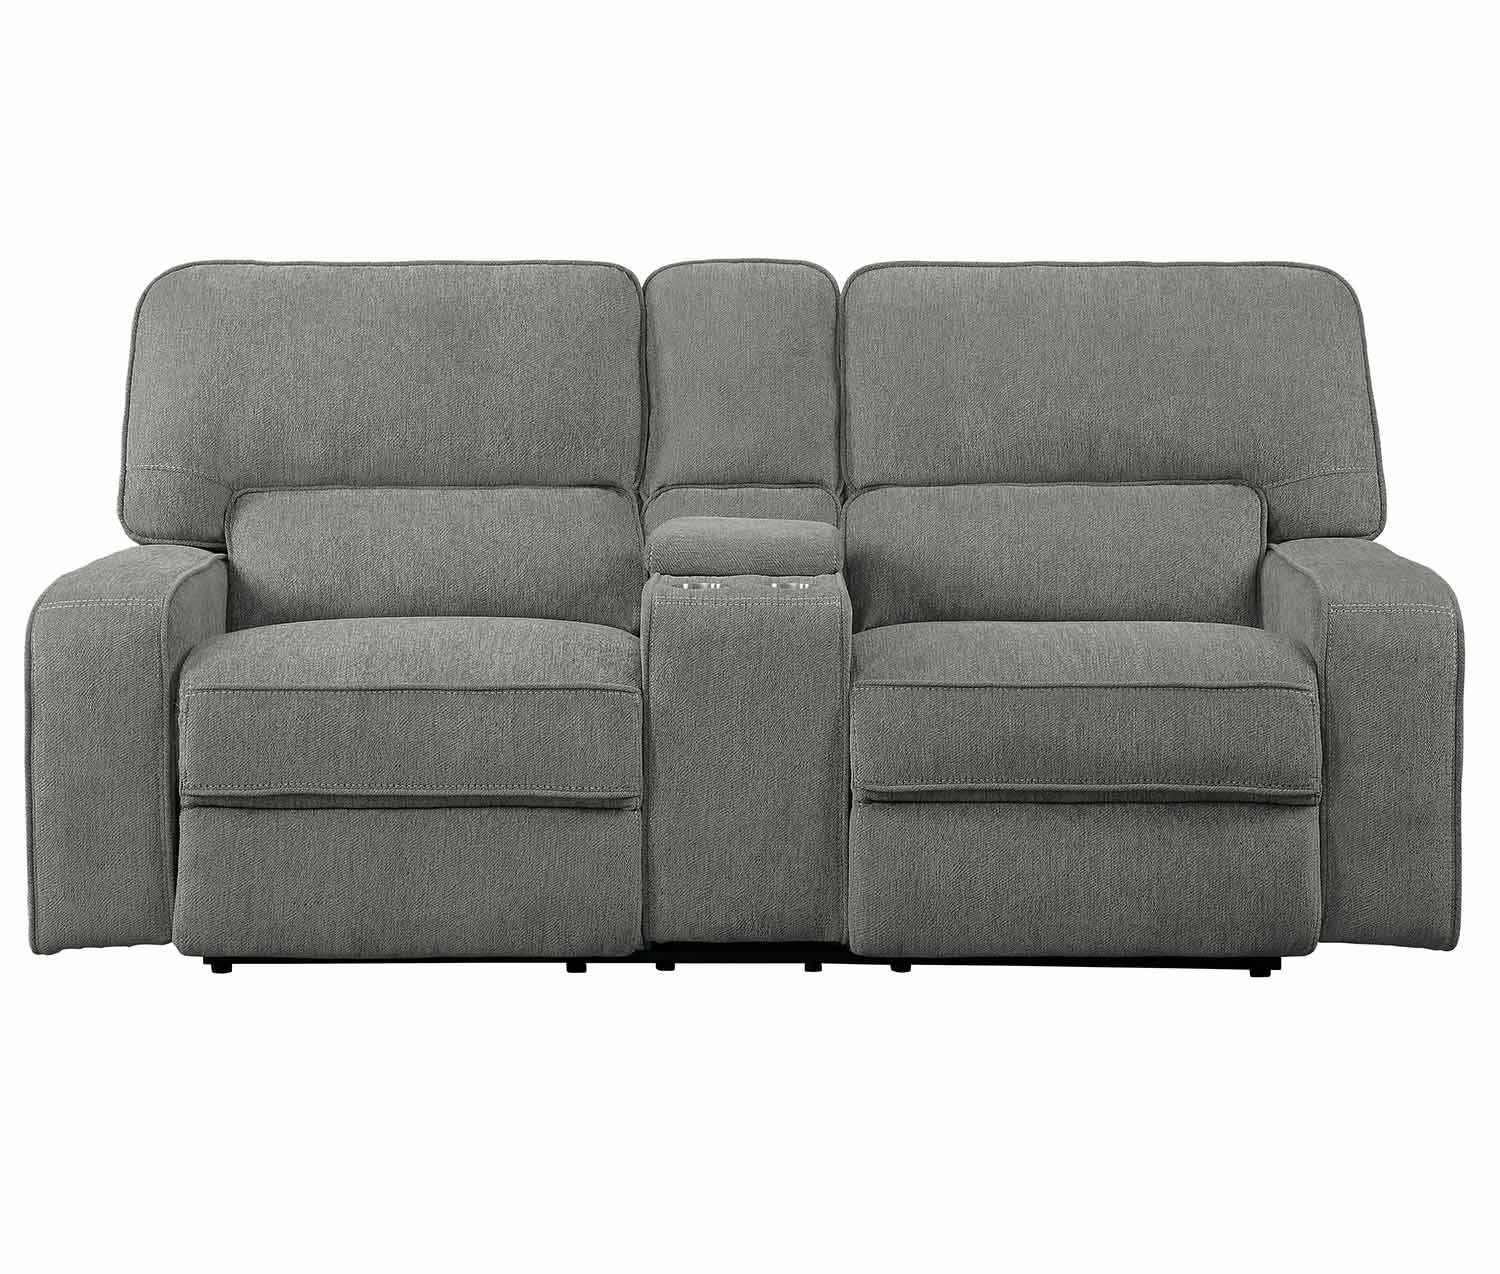 Homelegance Borneo Power Double Reclining Love Seat with Center Console and Power Headrests - Mocha